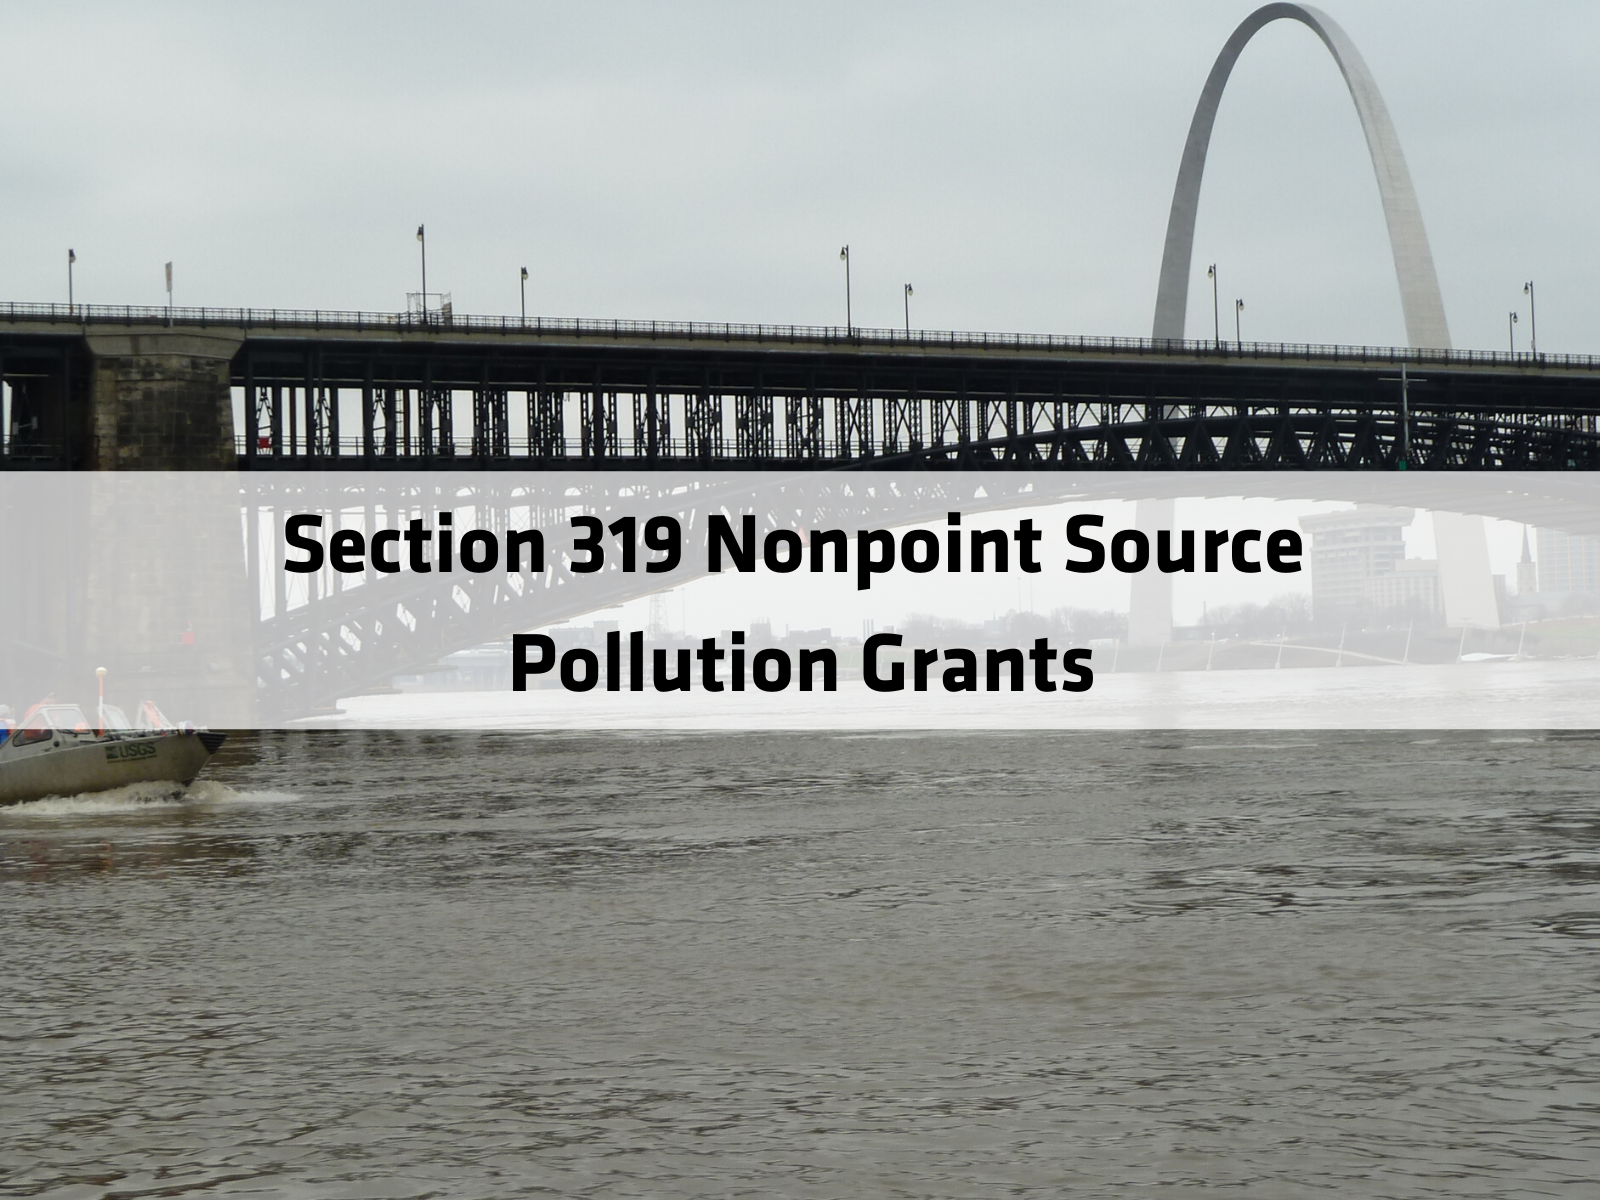 Section 319 Nonpoint Source (NPS) Pollution Grants